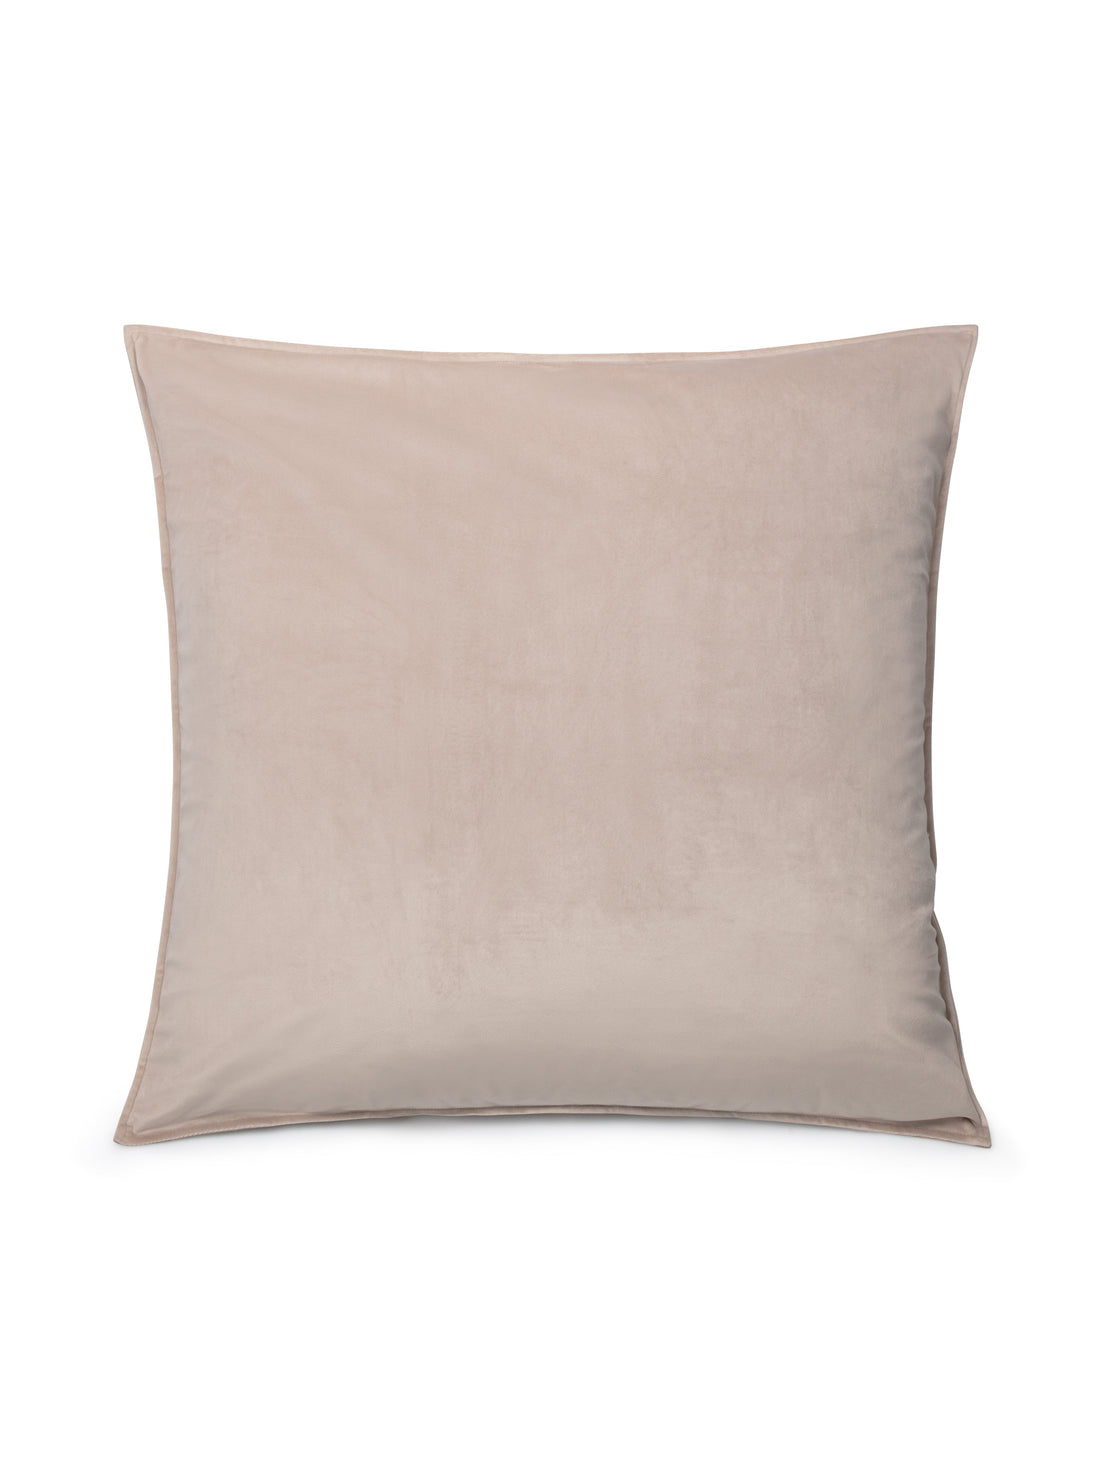 Luxurious mouse-colored velvet cushion with feather insert by Chalk, perfect for a neutral and stylish home aesthetic.